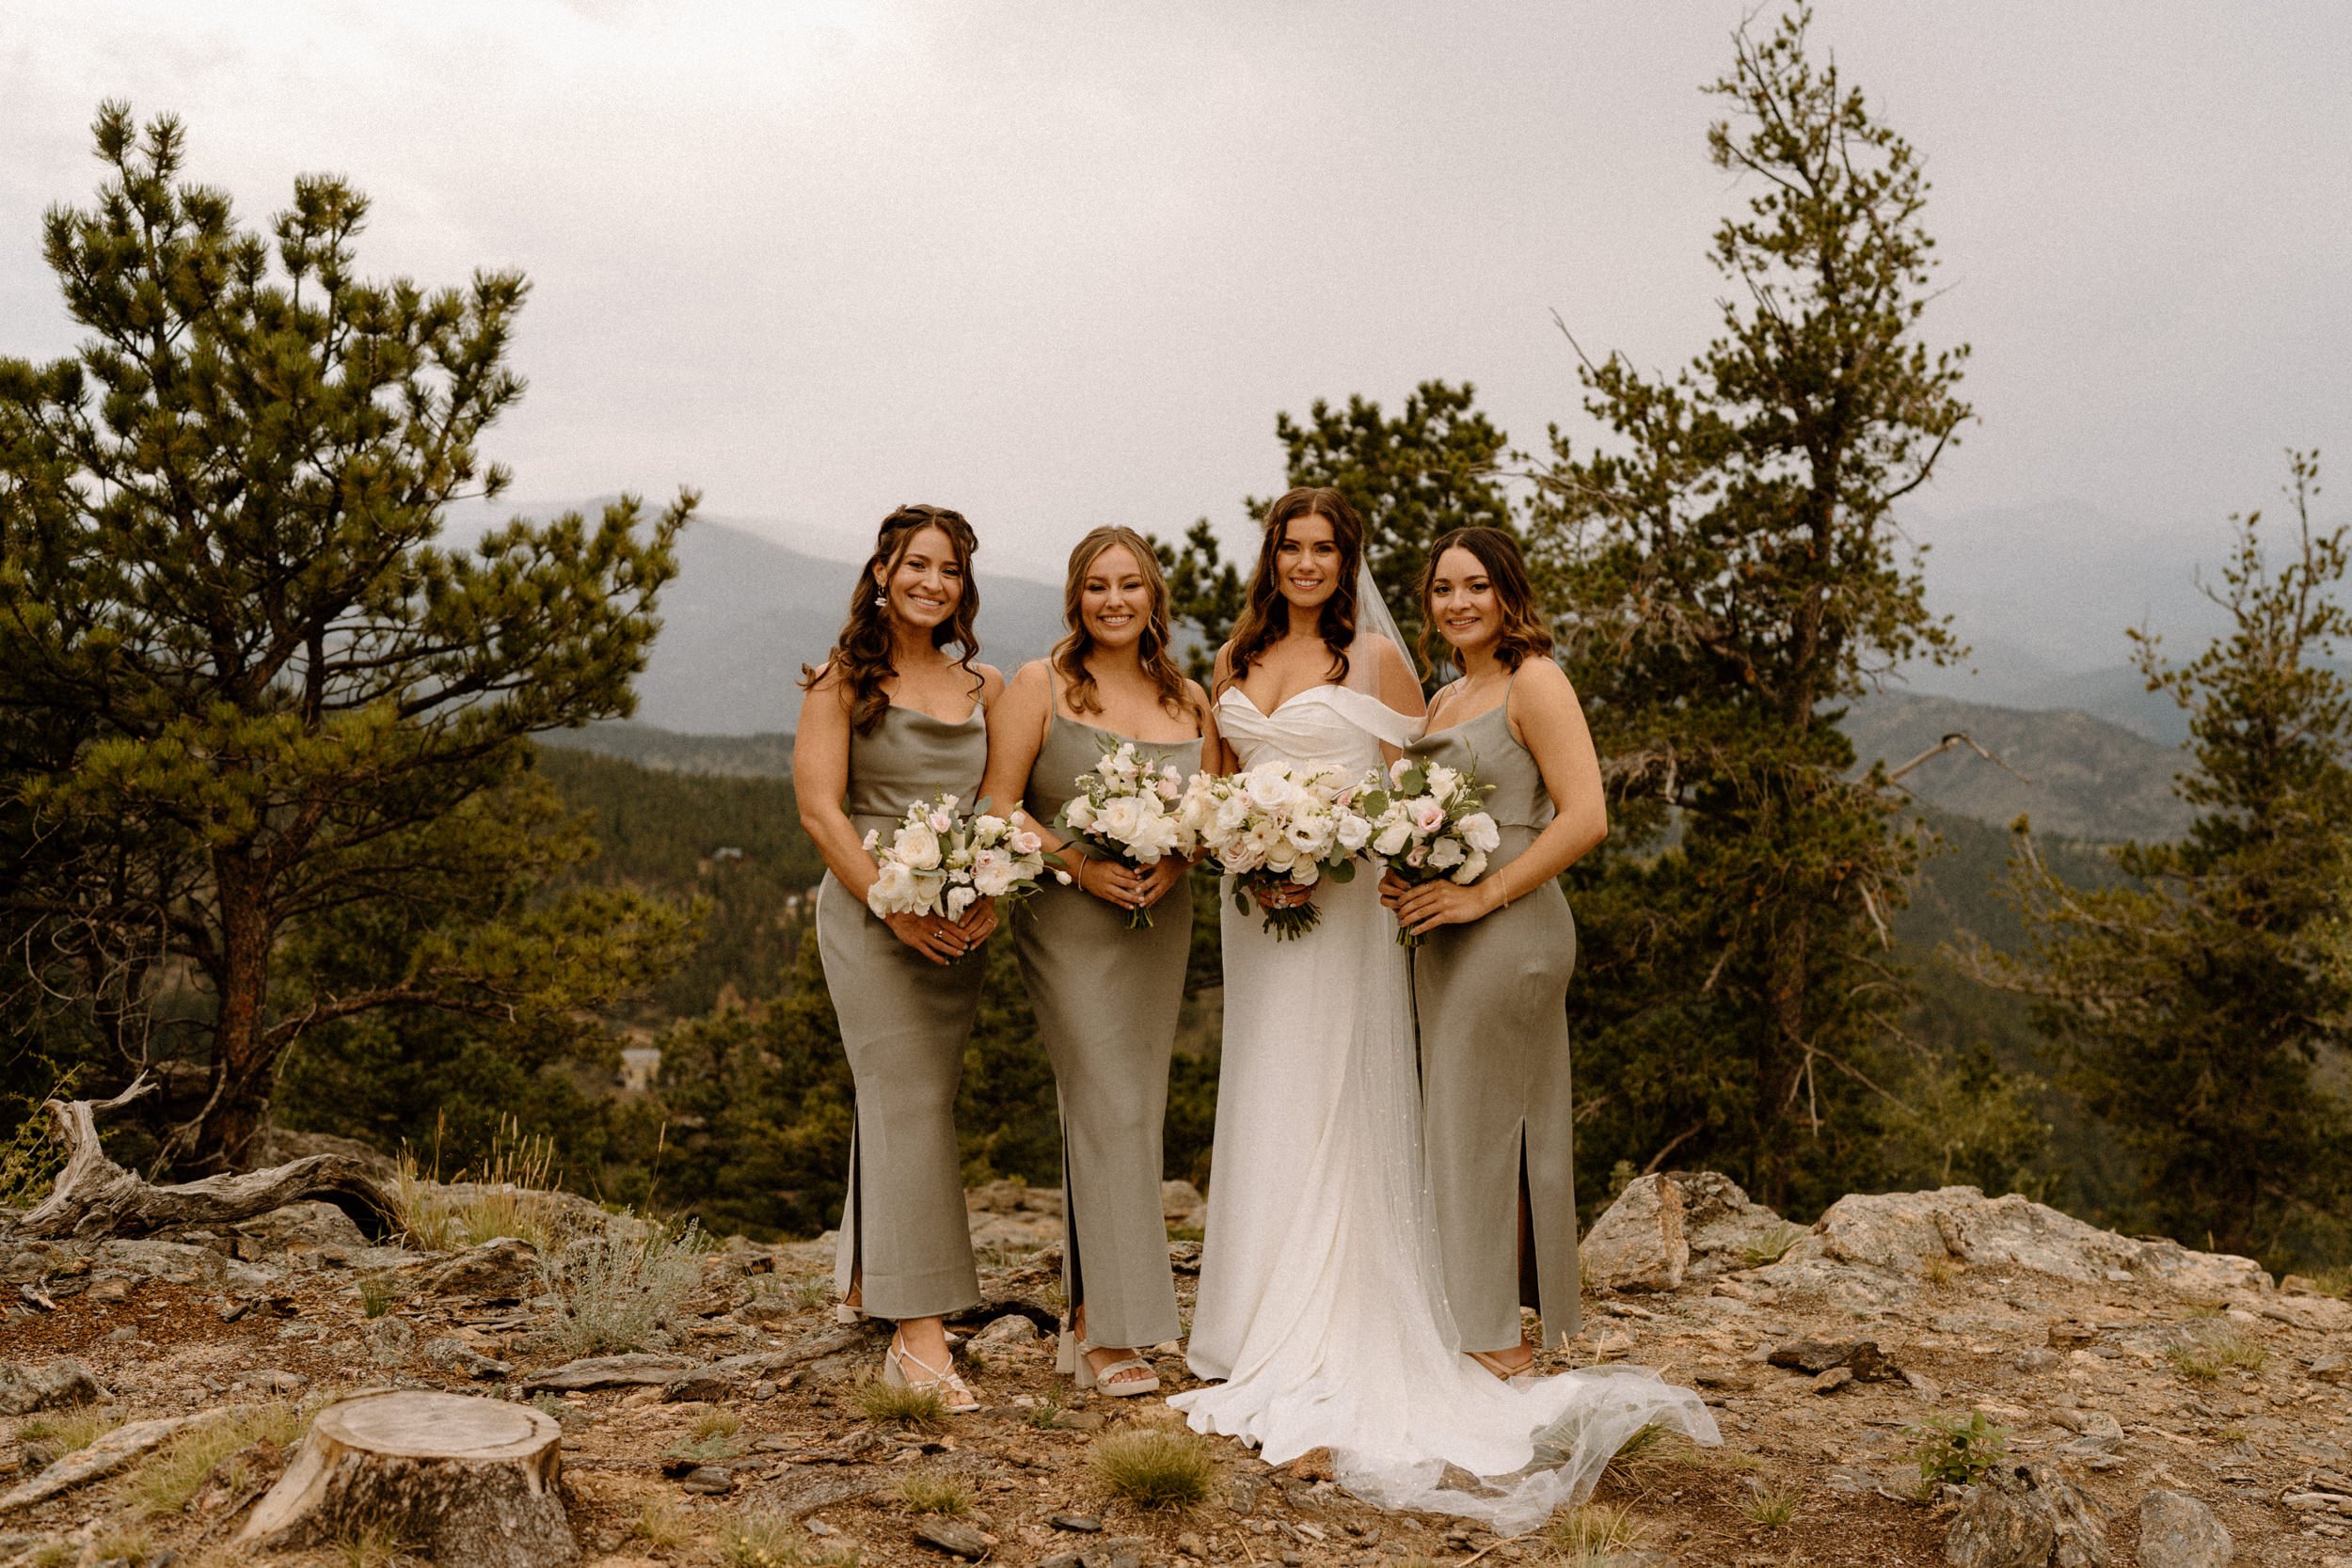 The bride poses with her bridesmaids outside of North Star Gatherings in Idaho Springs, CO